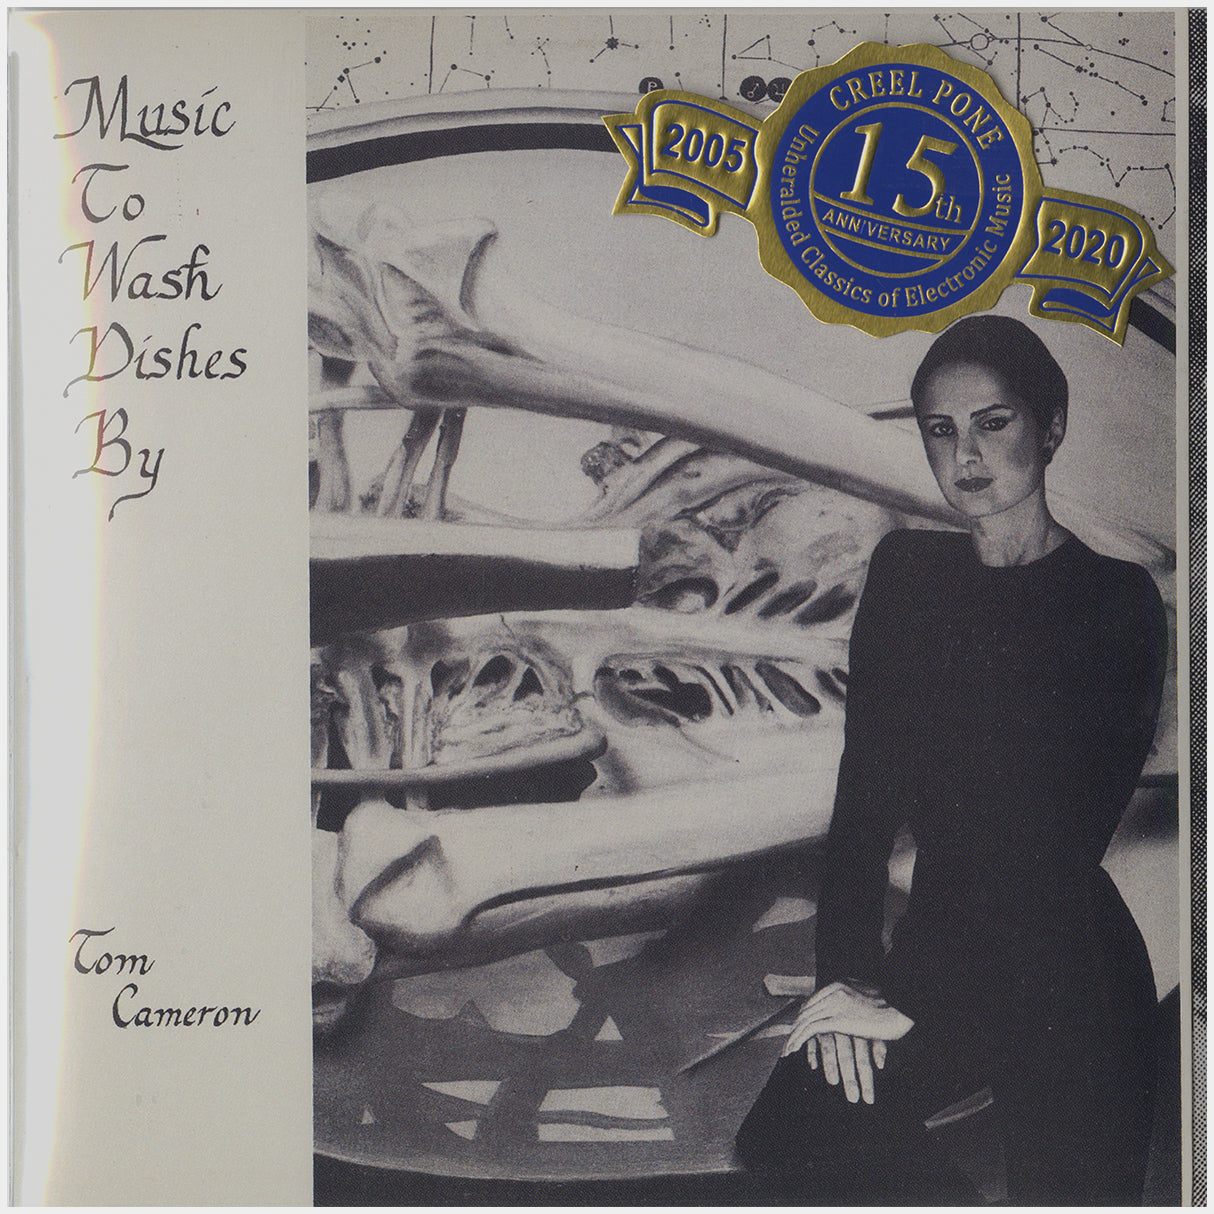 [CP 105 CD] Tom Cameron; Music To Wash Dishes By +